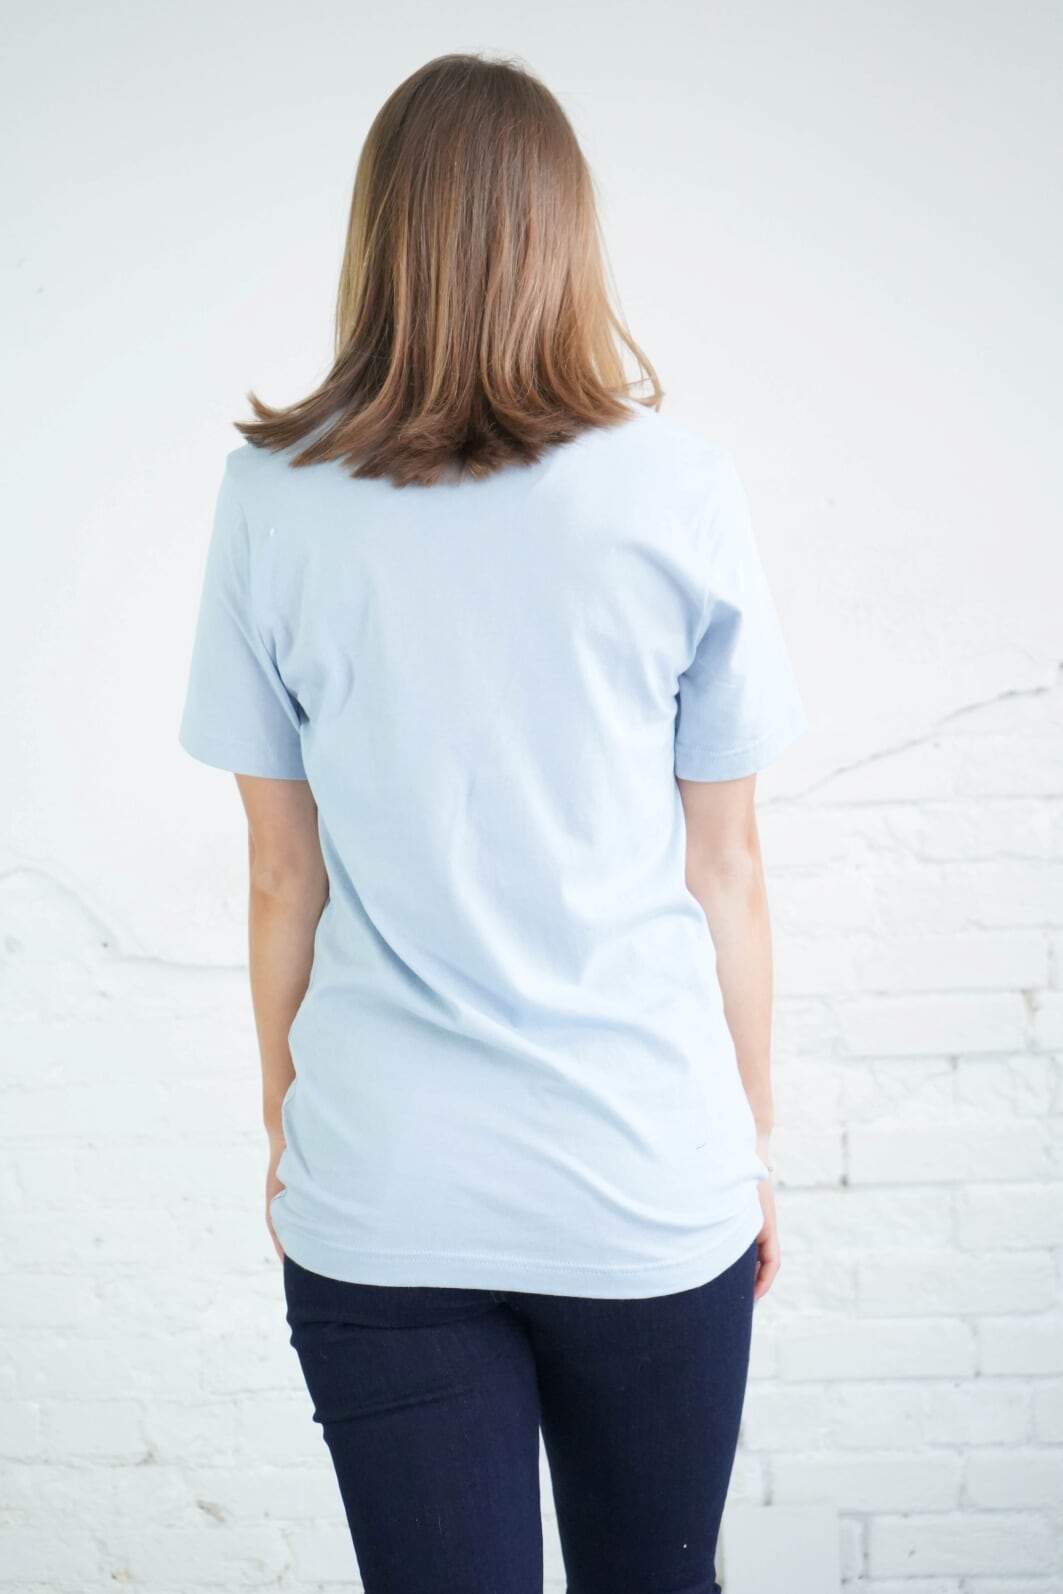 Blume + Co Graphic Tee Always Stay Humble & Kind